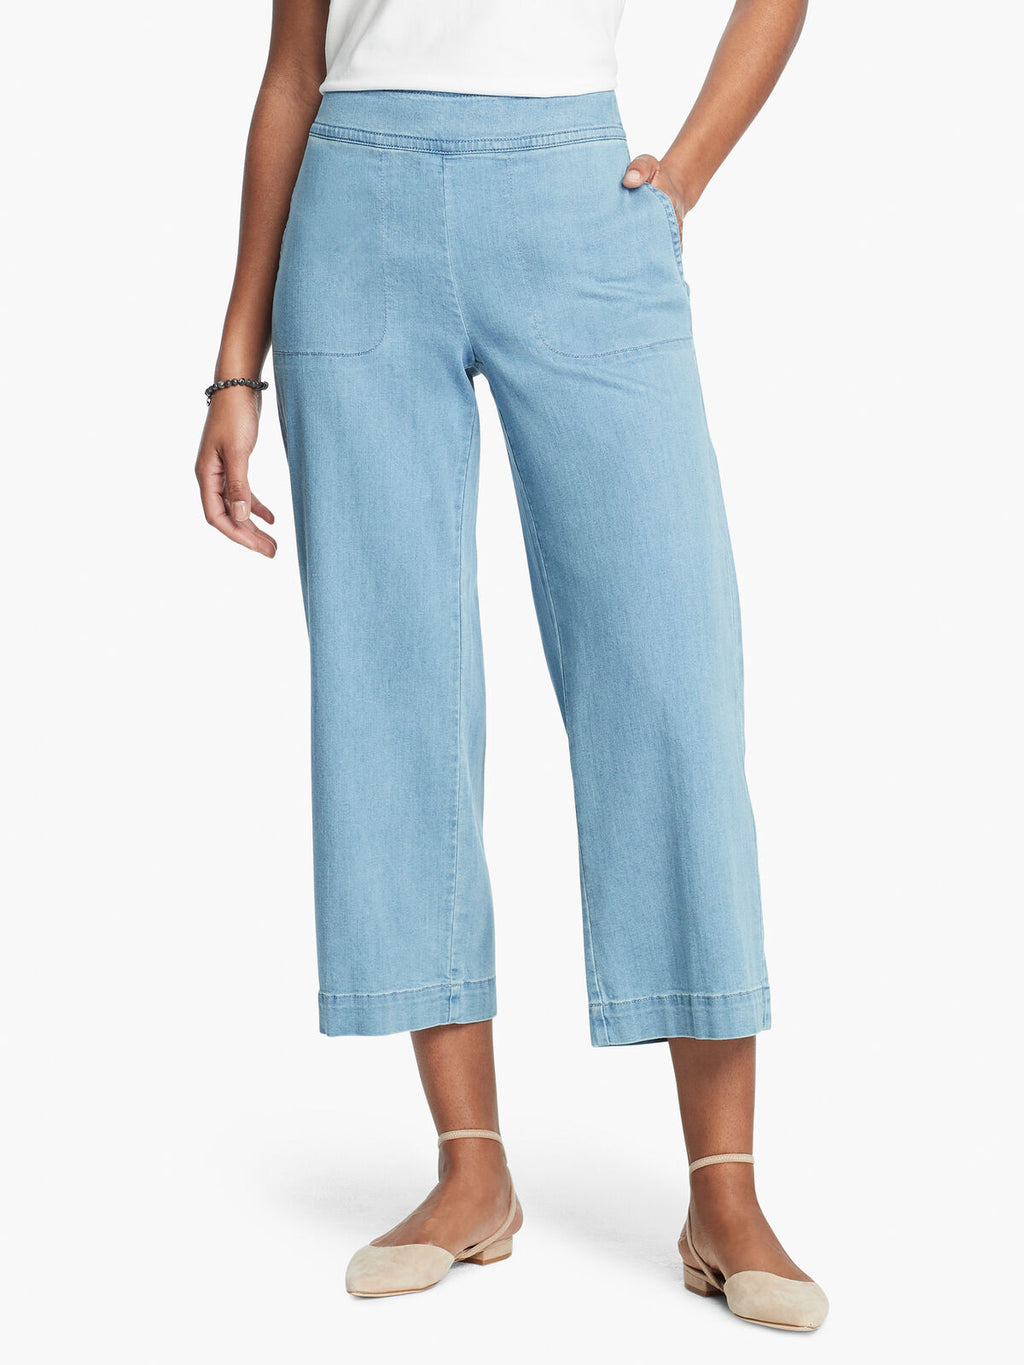 Front, bottom half view of a woman wearing a white top and the Nic + Zoe Summer day denim pant. These light wash jeans are wide legged and cropped with side pockets.